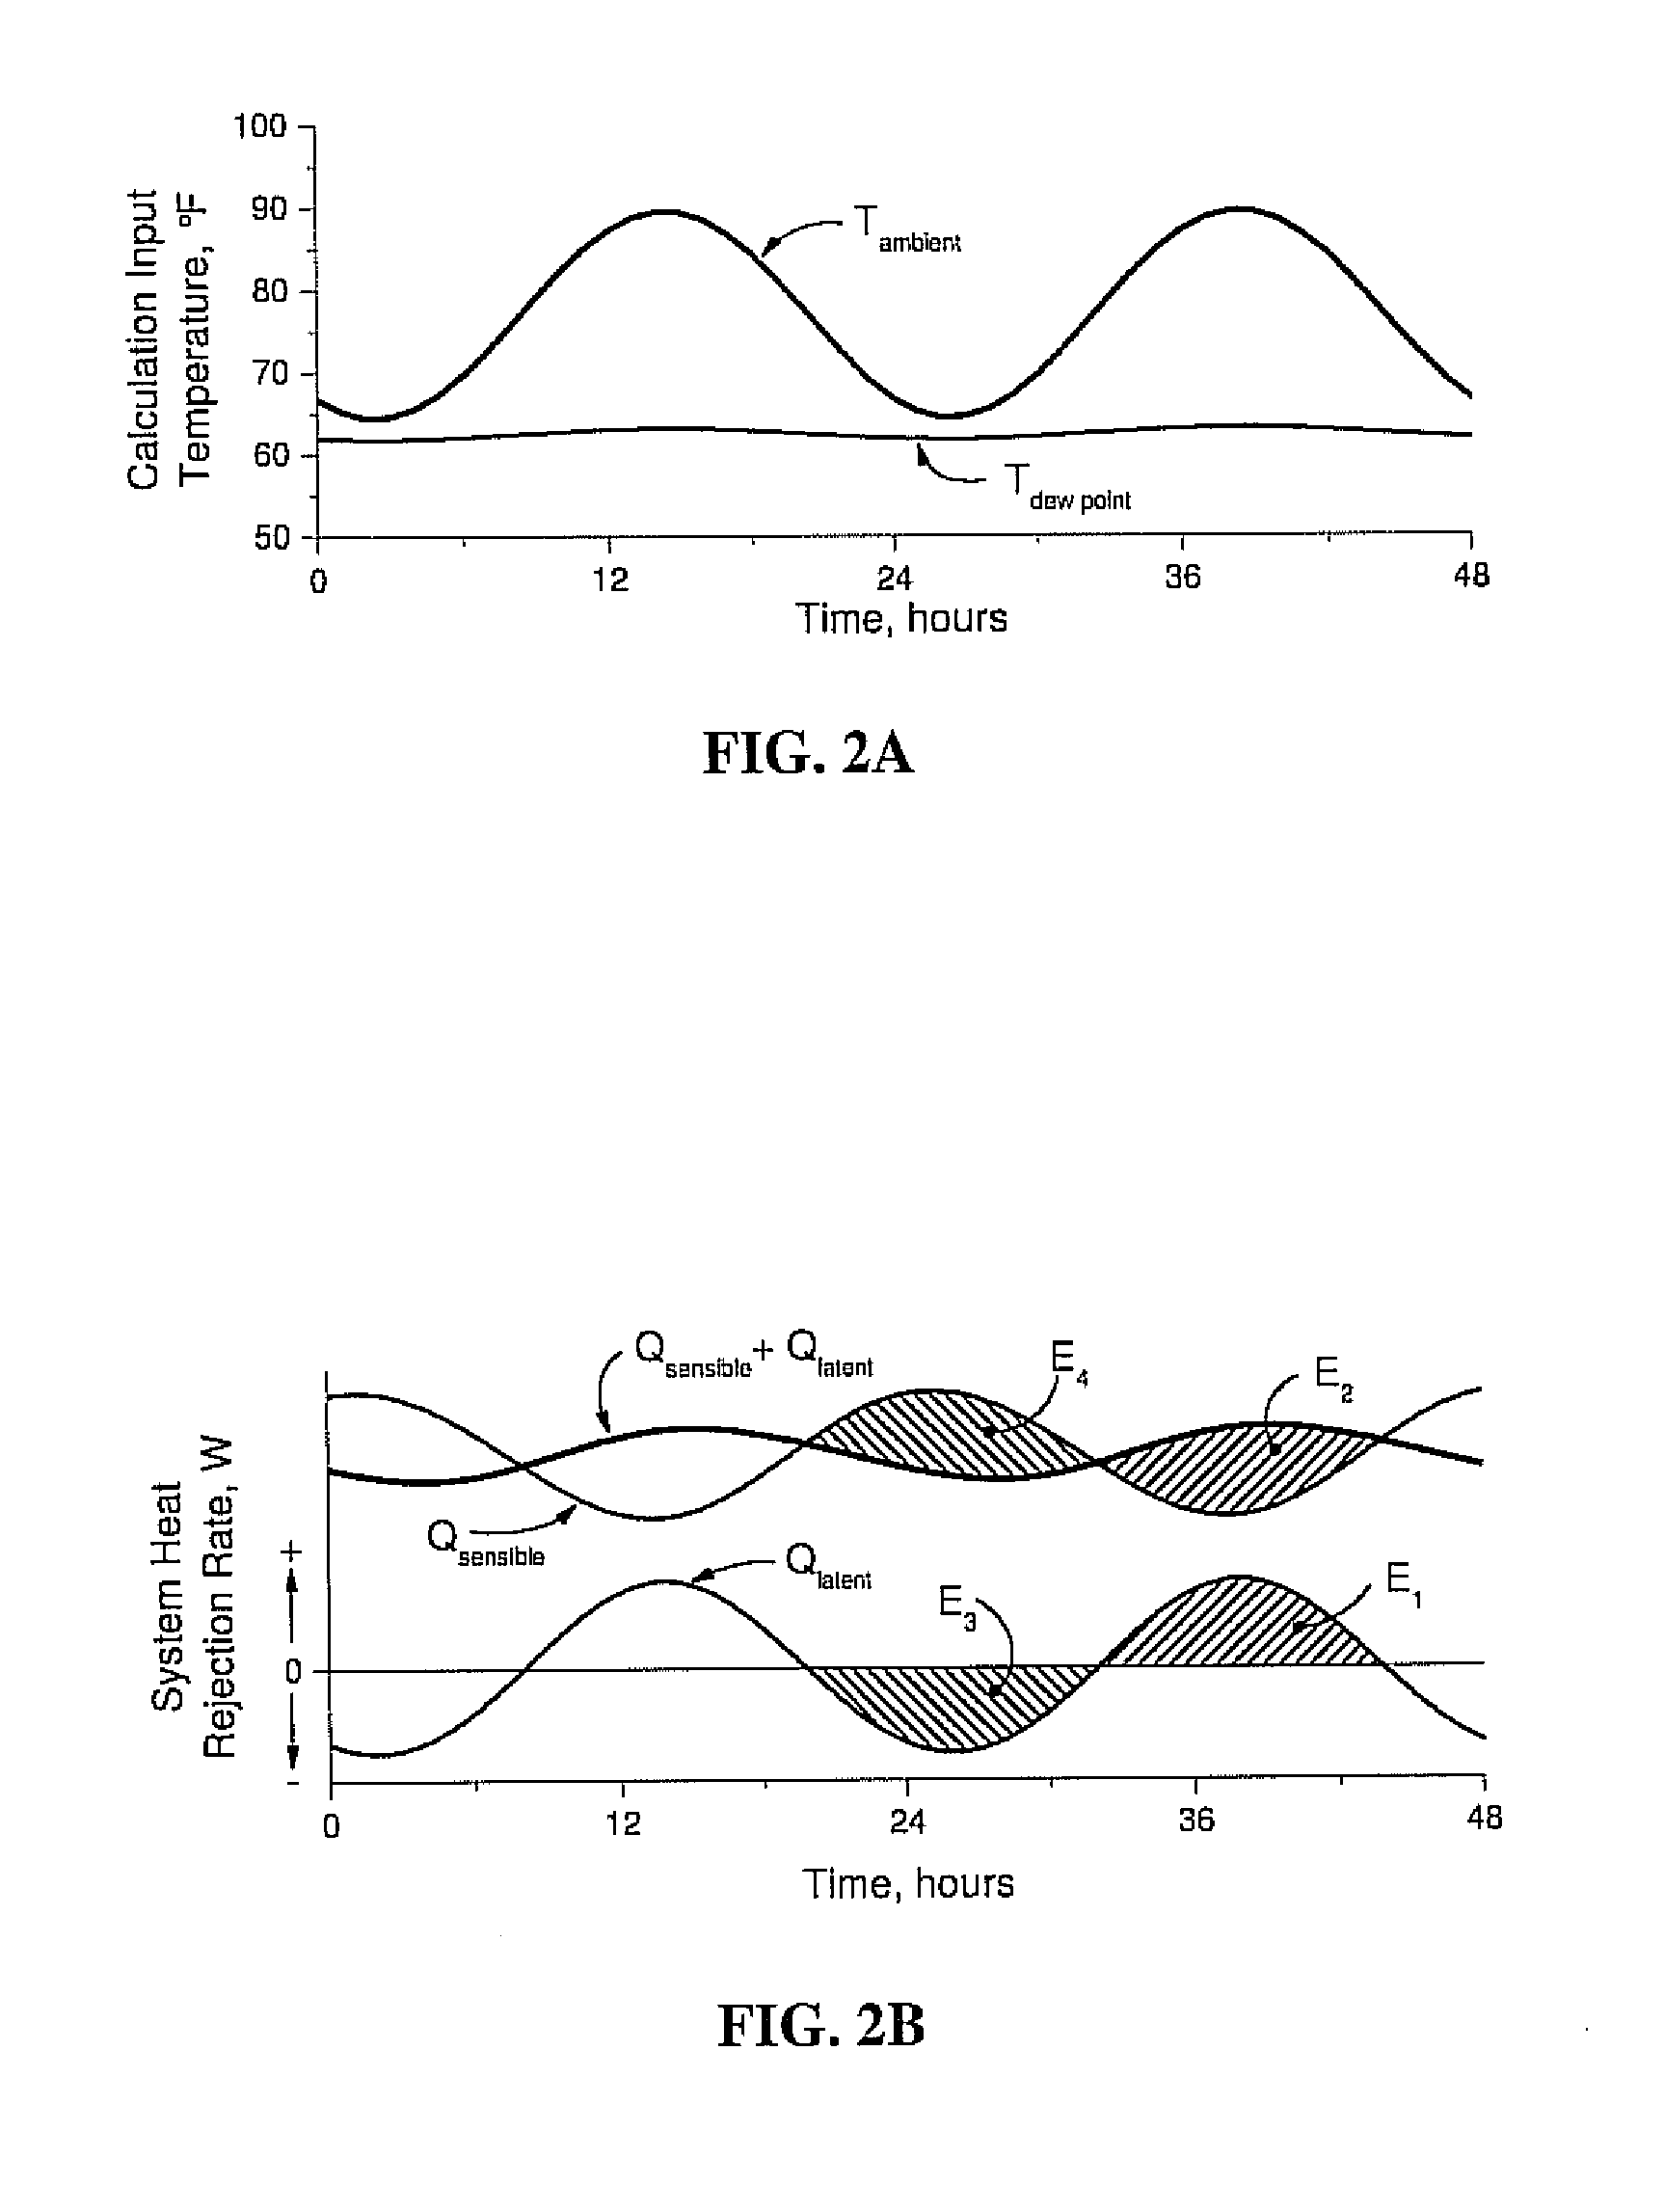 Heat dissipation system with hygroscopic working fluid